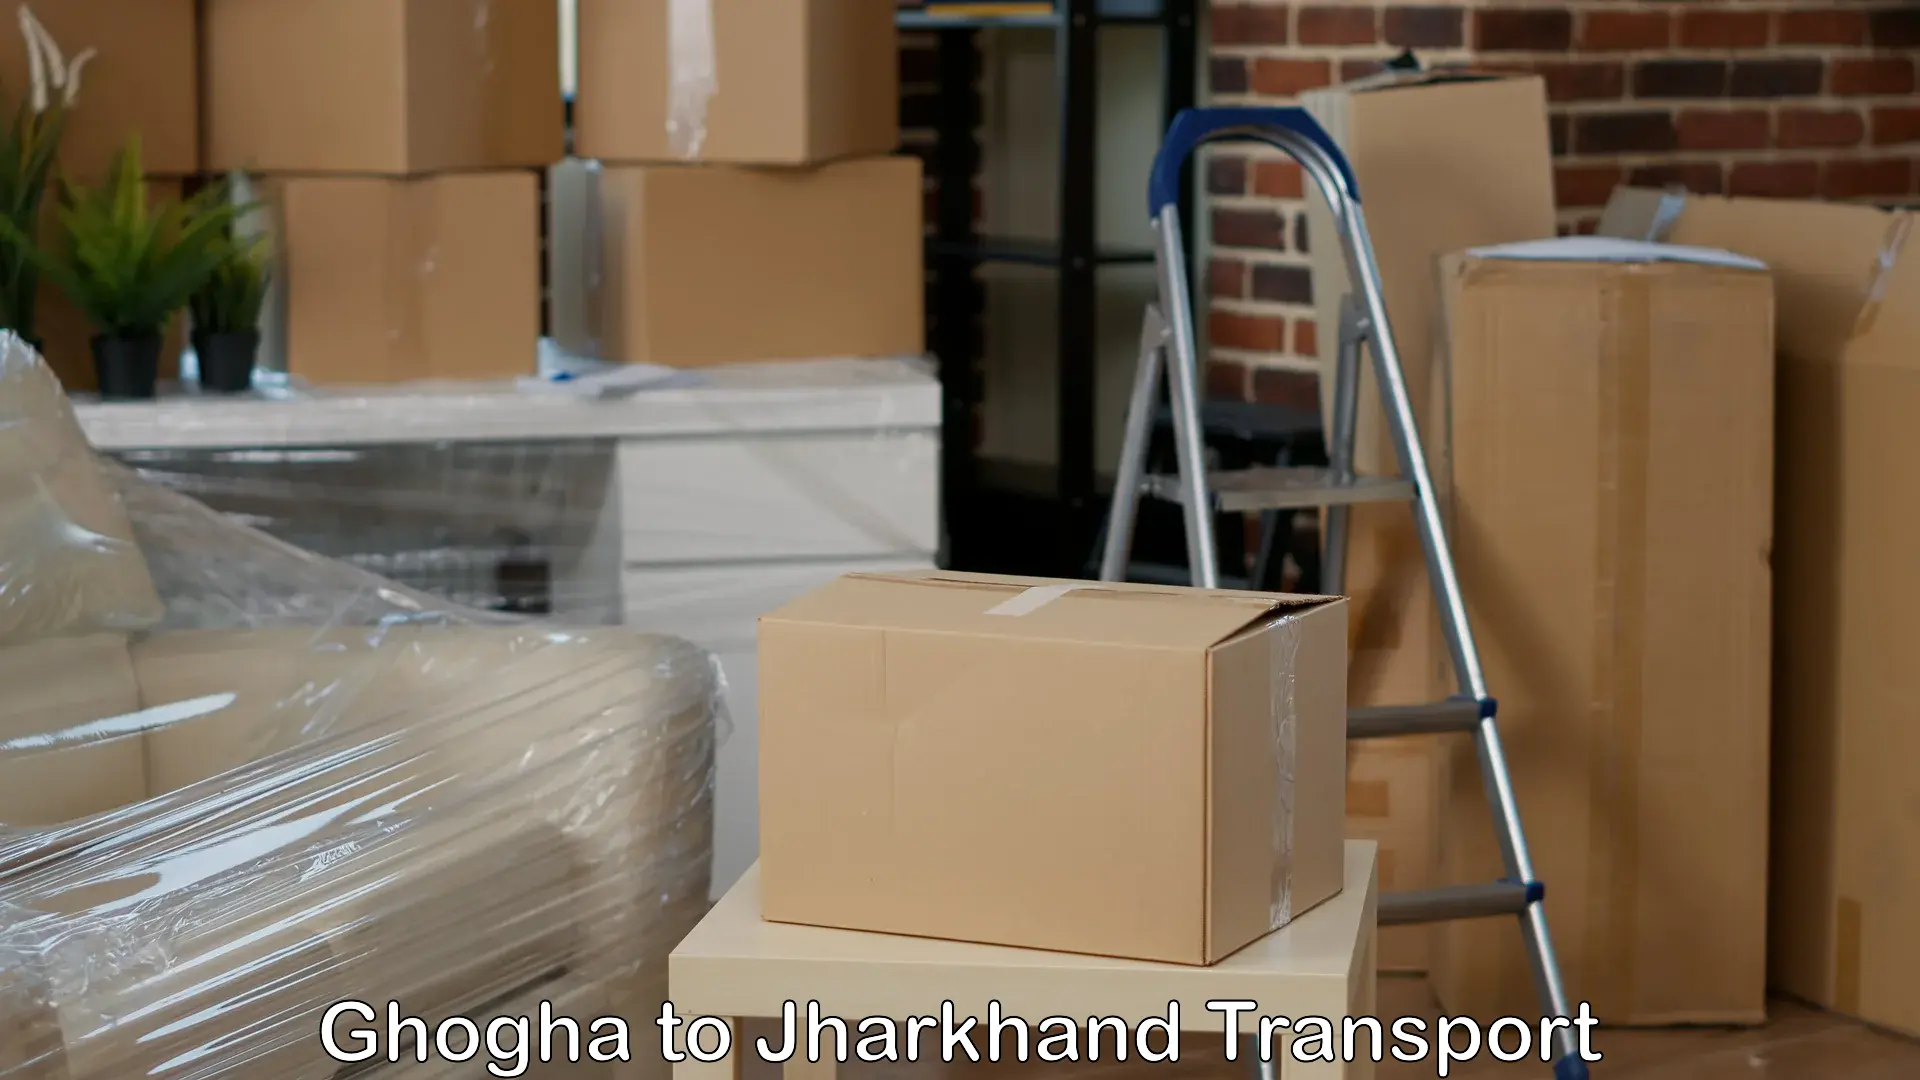 Furniture transport service Ghogha to Jharkhand